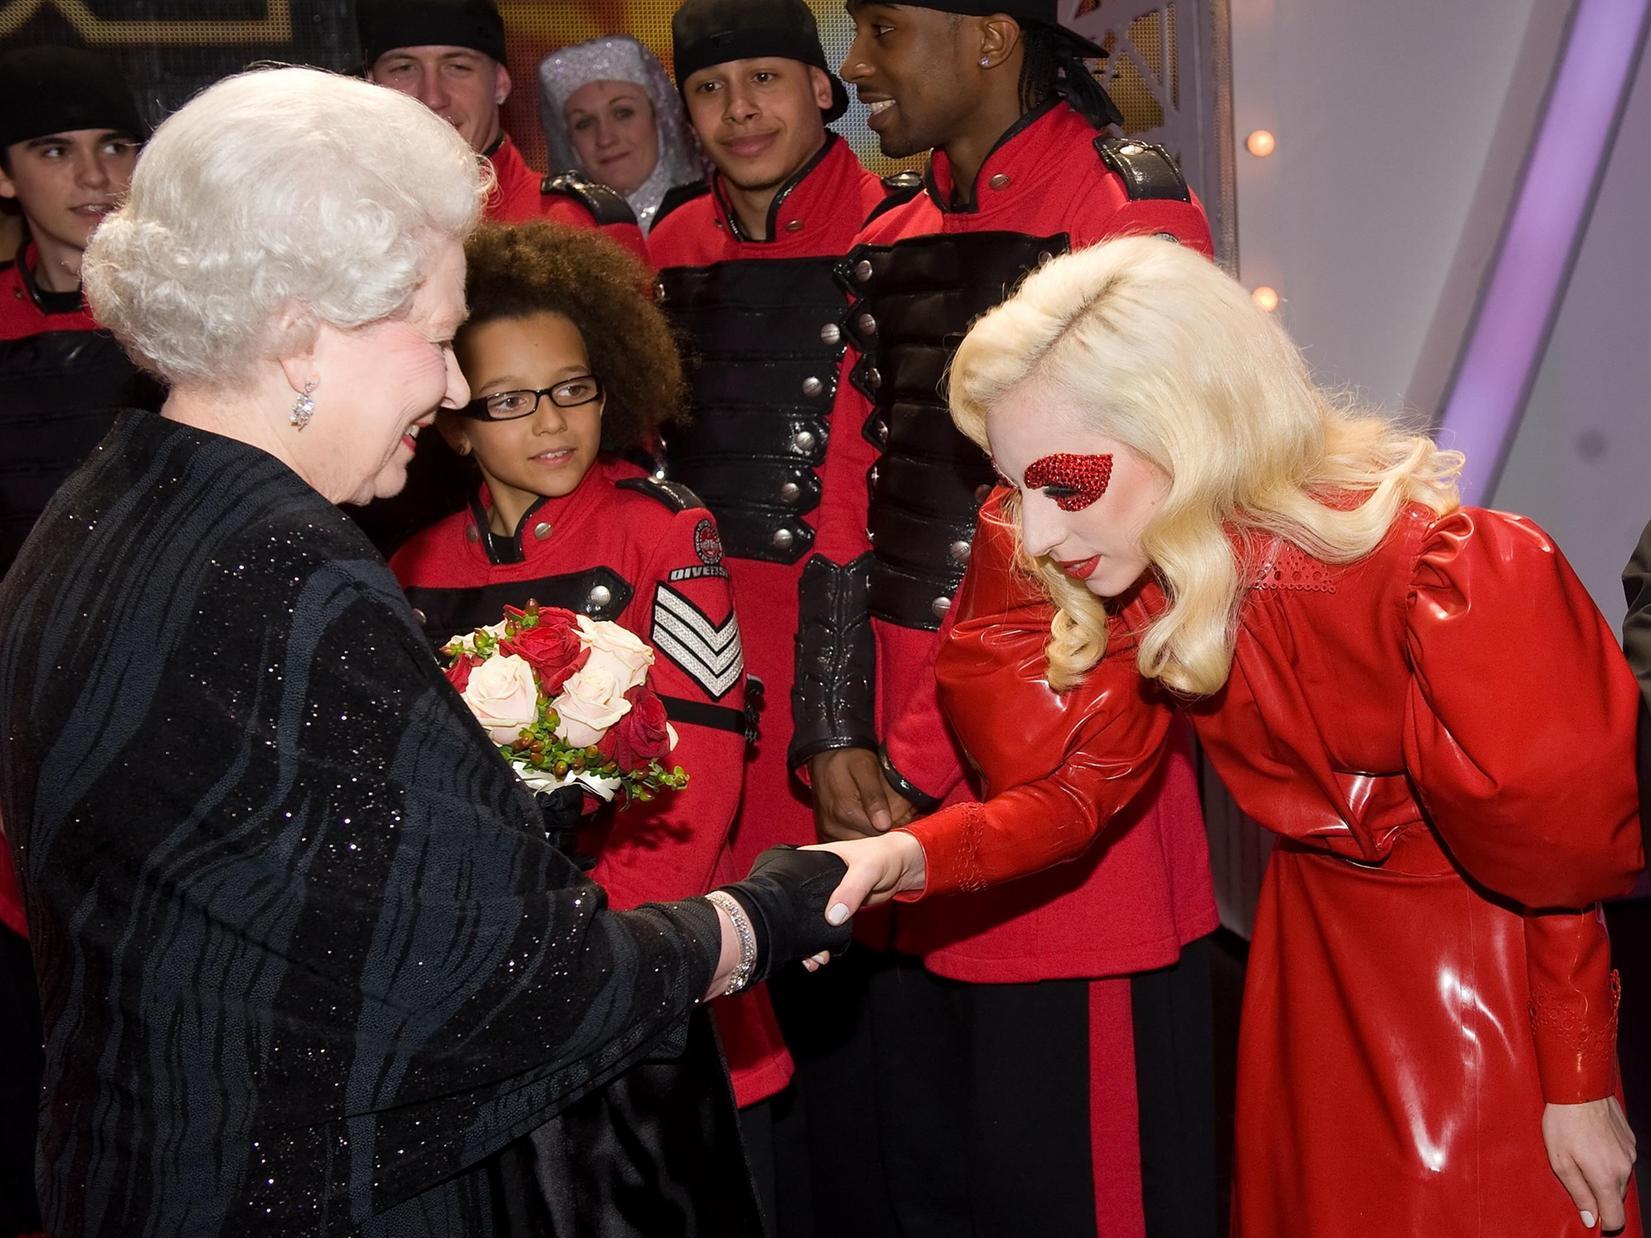 Lady GaGa was one of the big stars who took part in the show. Here she is pictured meeting the Queen.